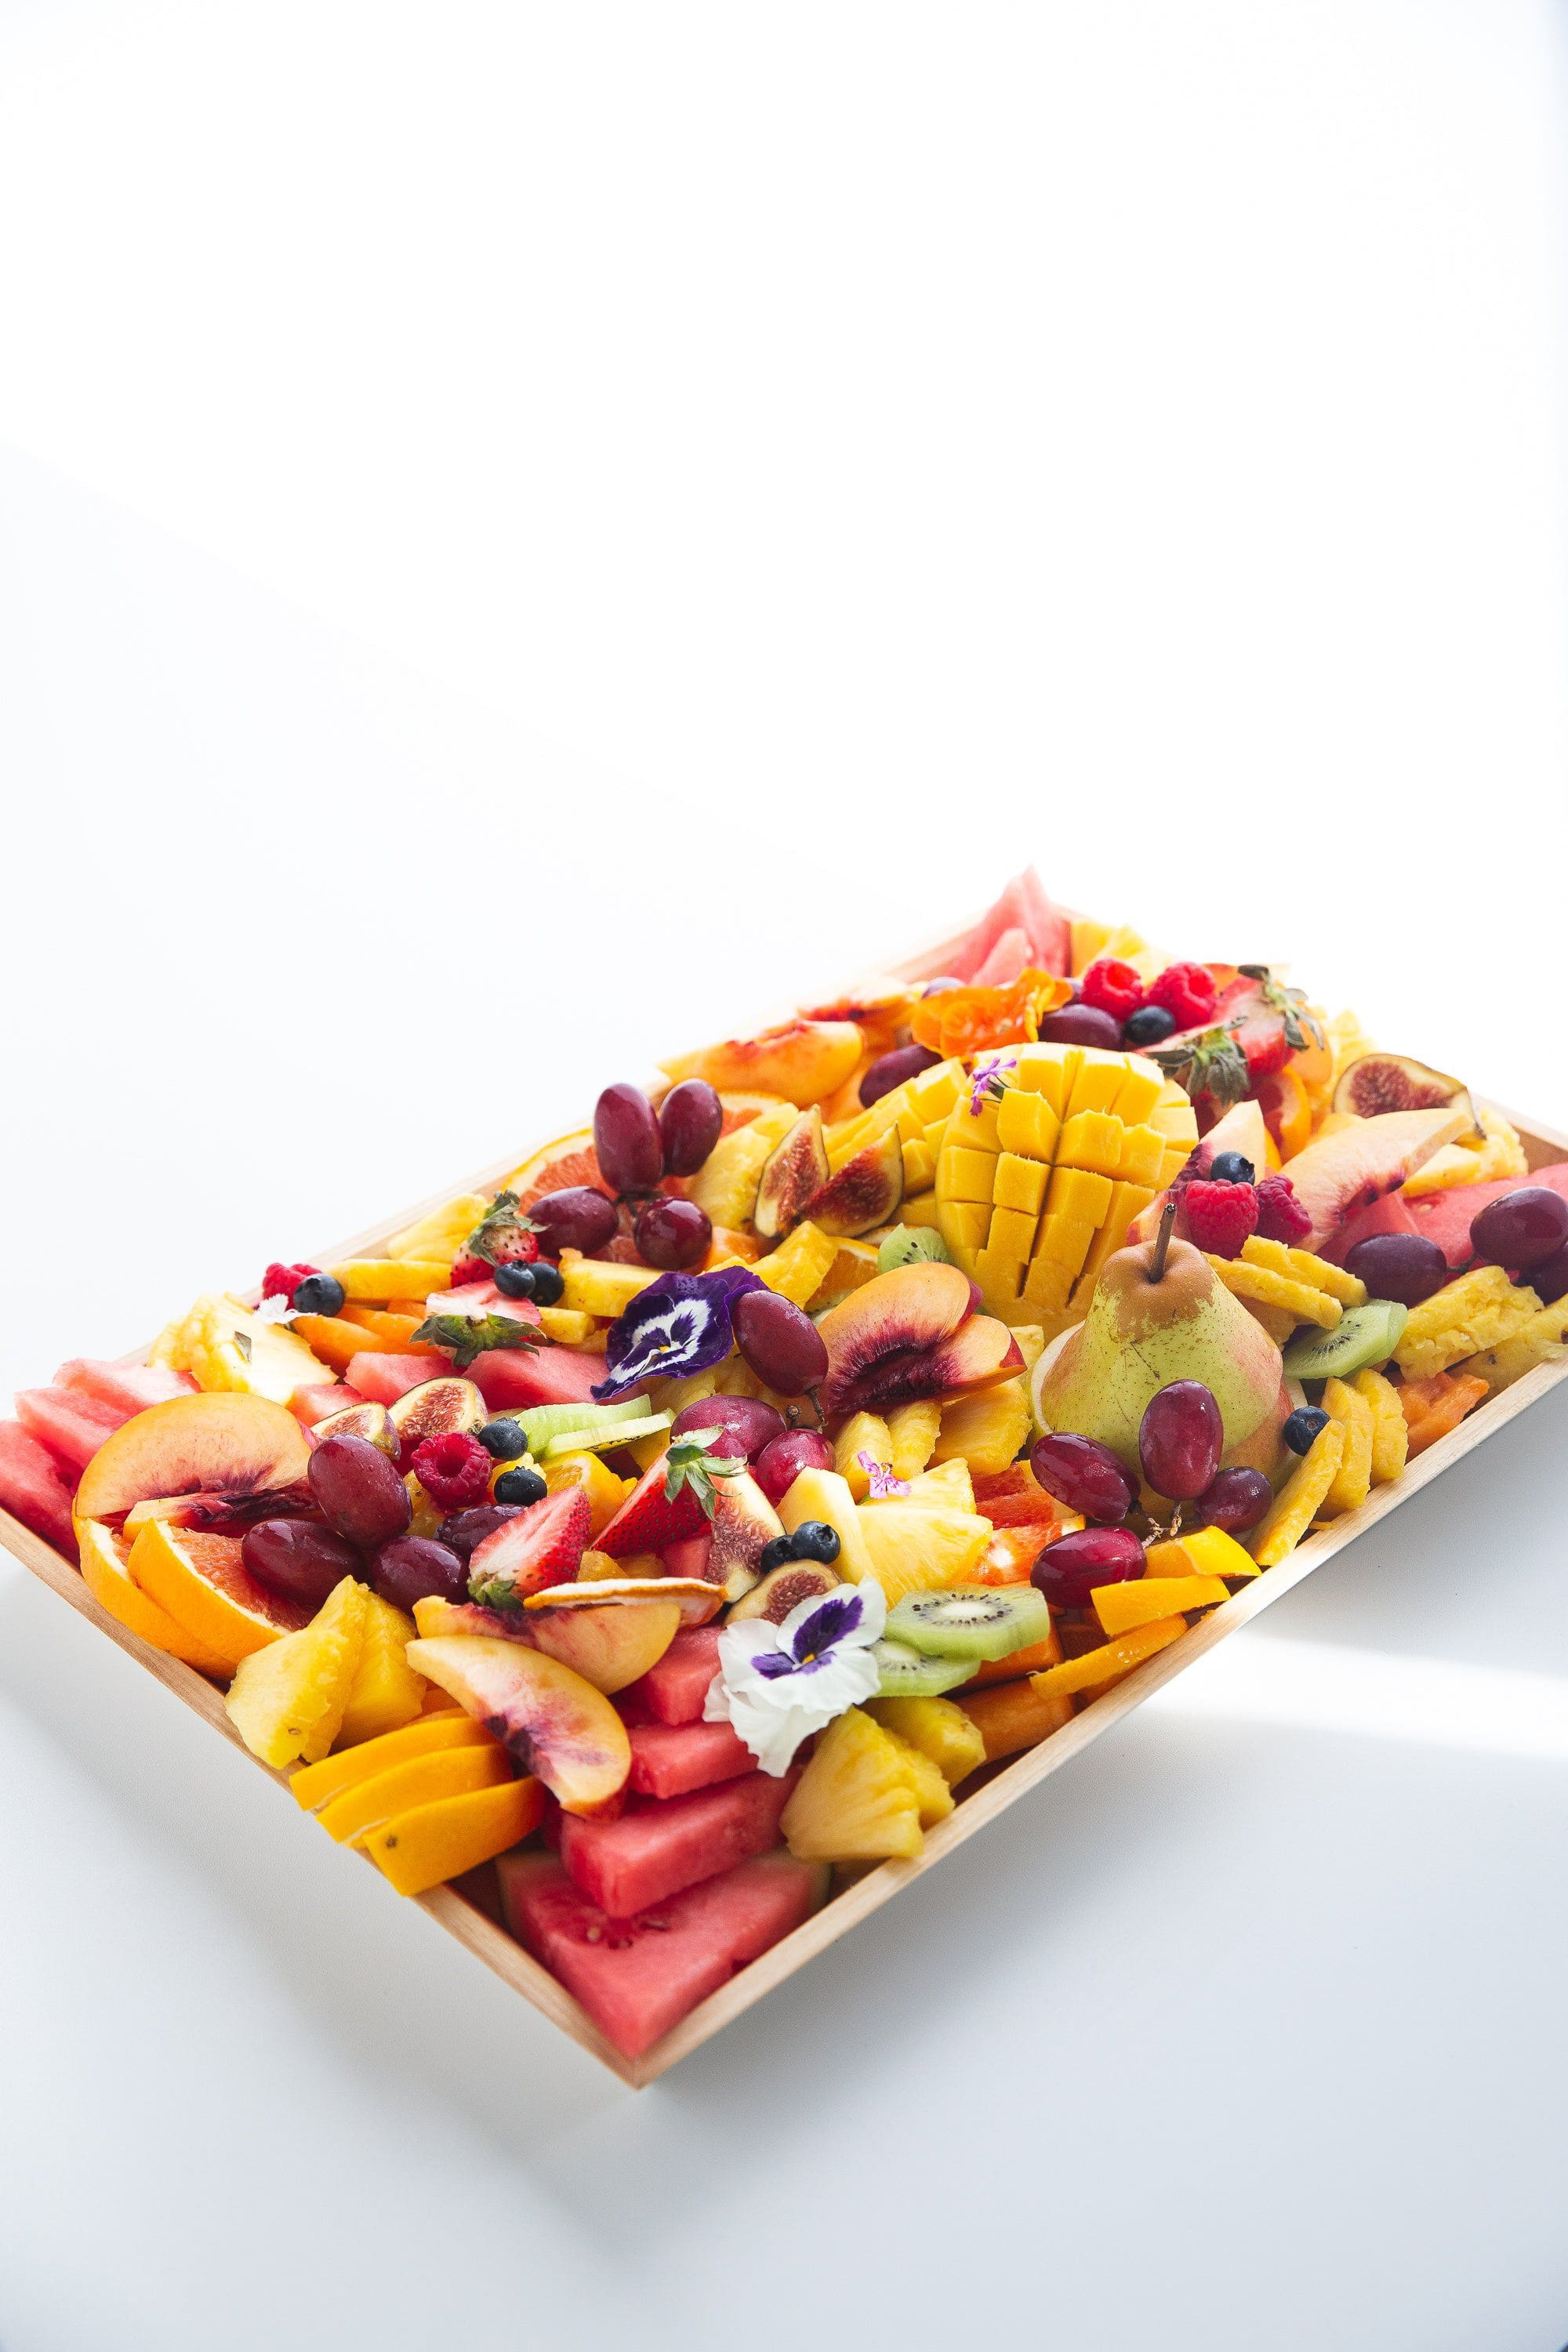 Best large fruit platter for delivery in Toronto Ontario